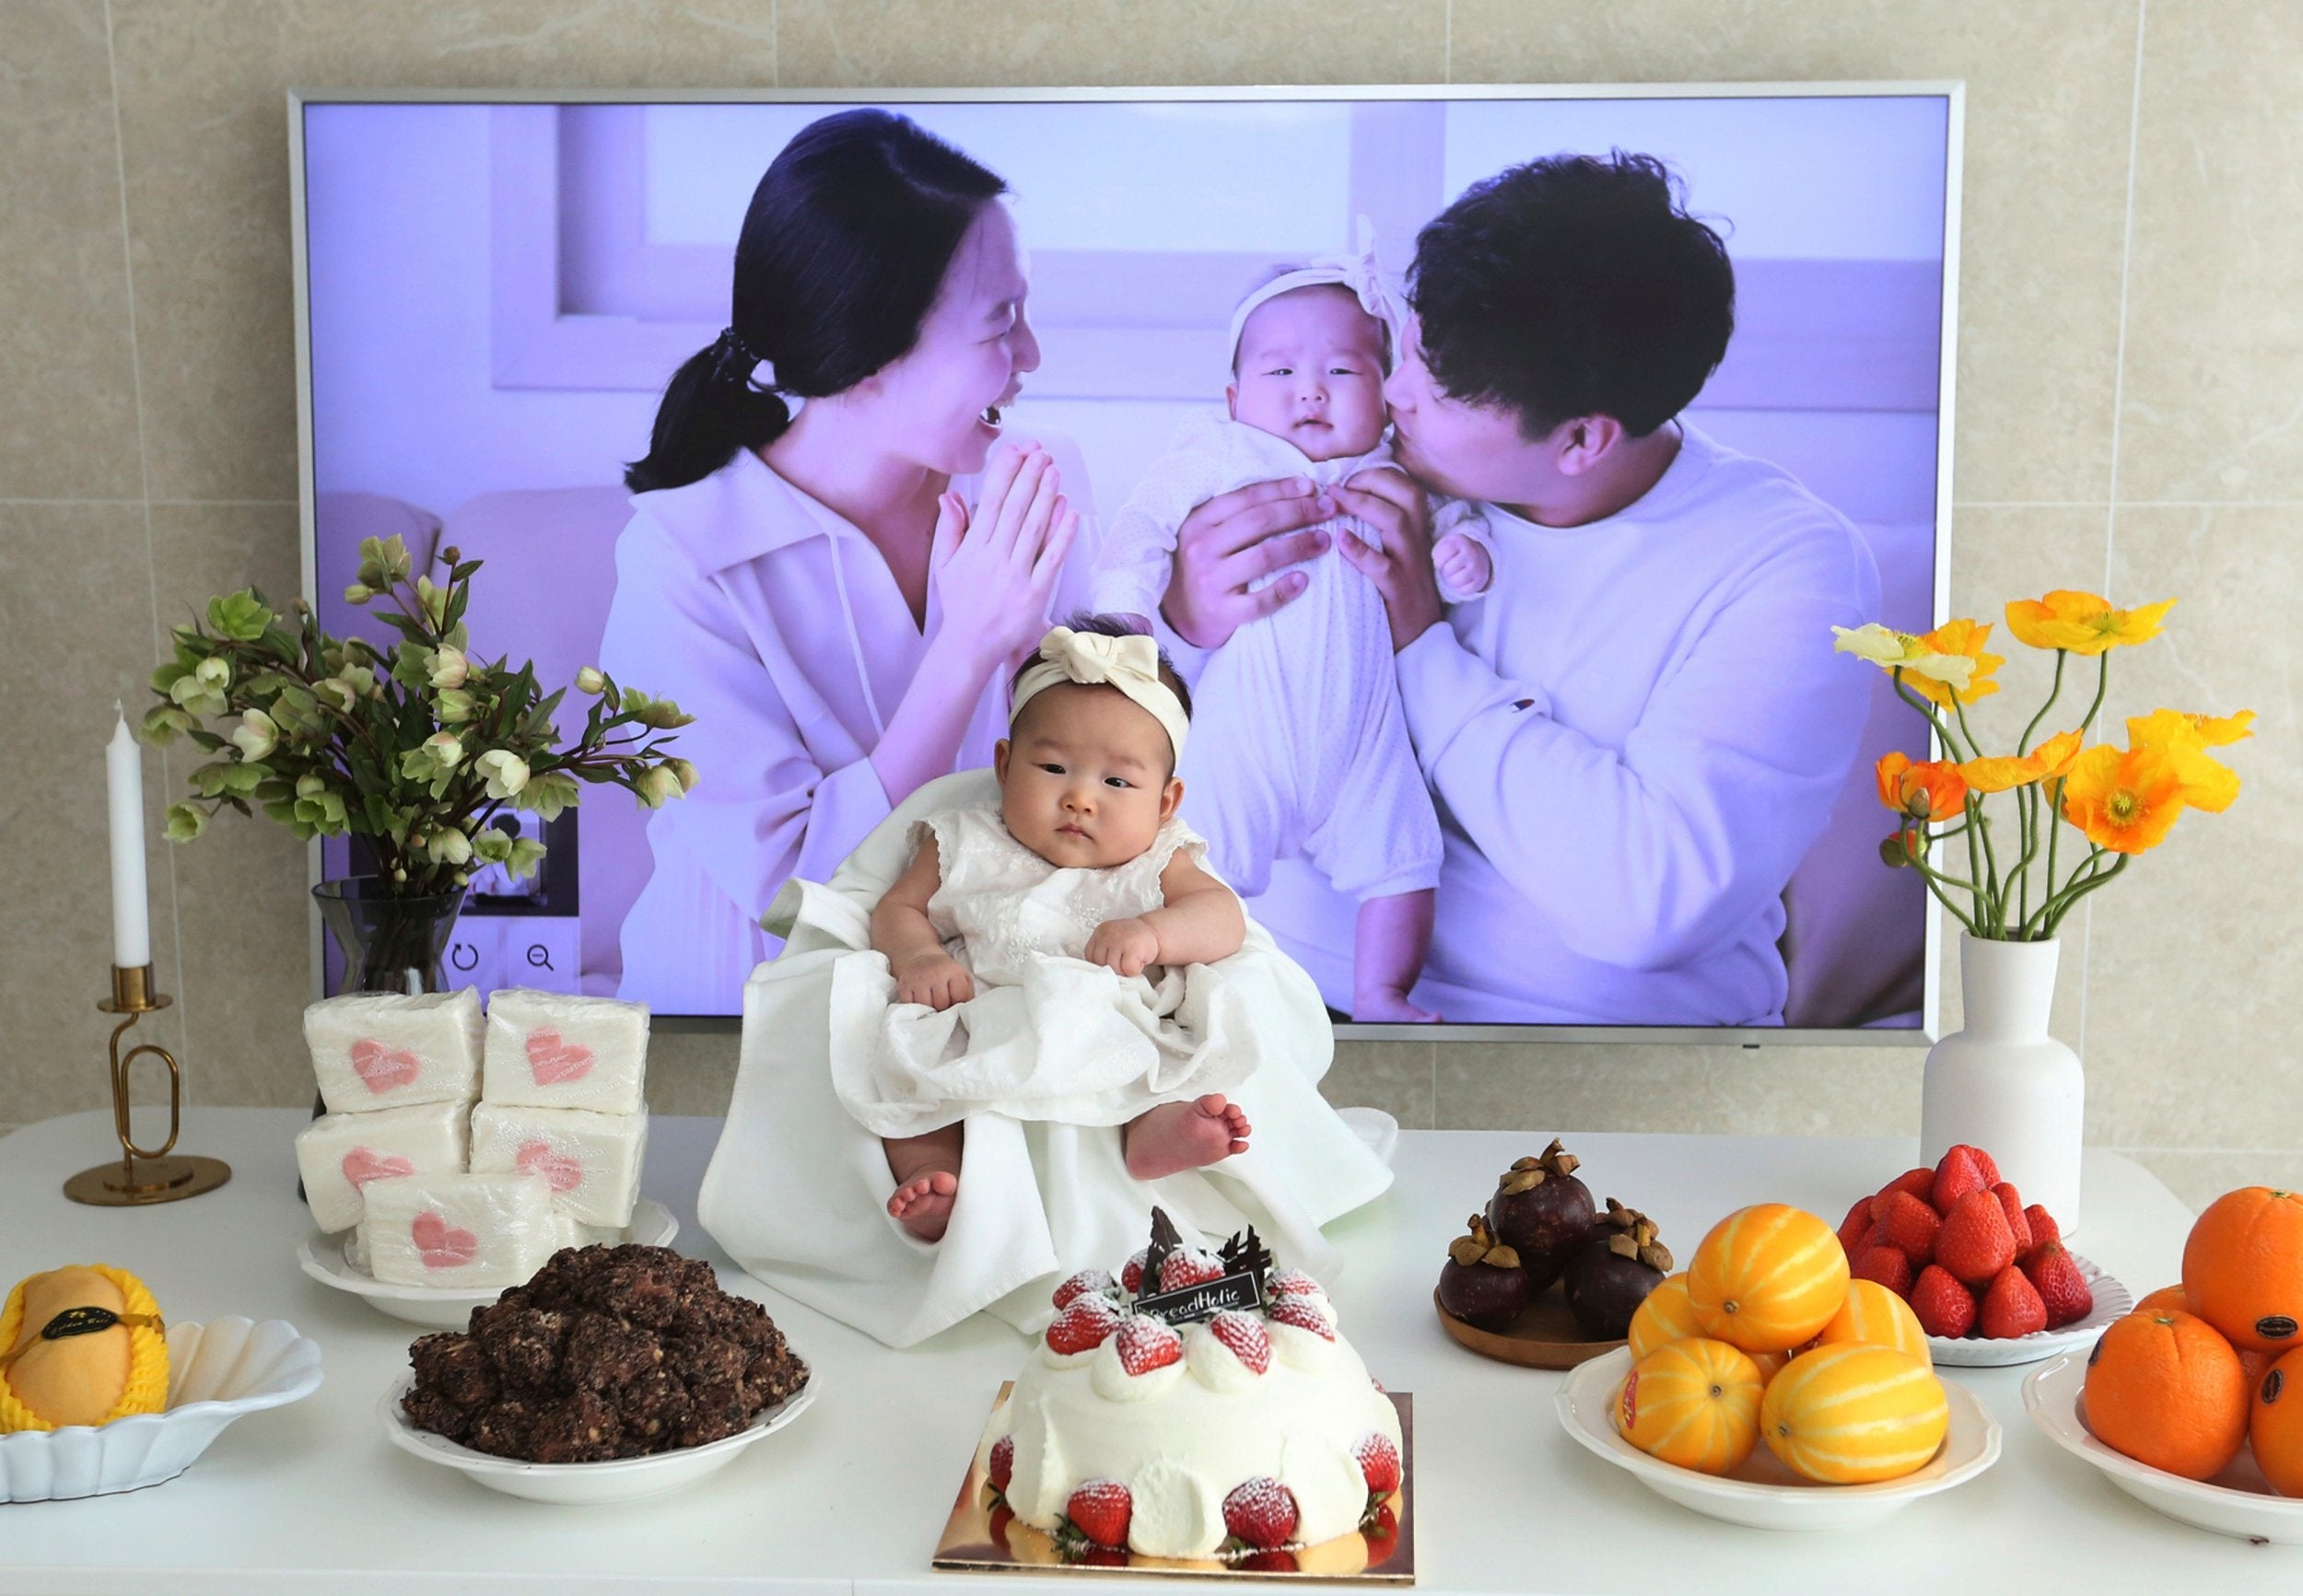 Lee Yoon Seol turned two years old just two hours after her birth, according to South Korea's unusual age-calculating system